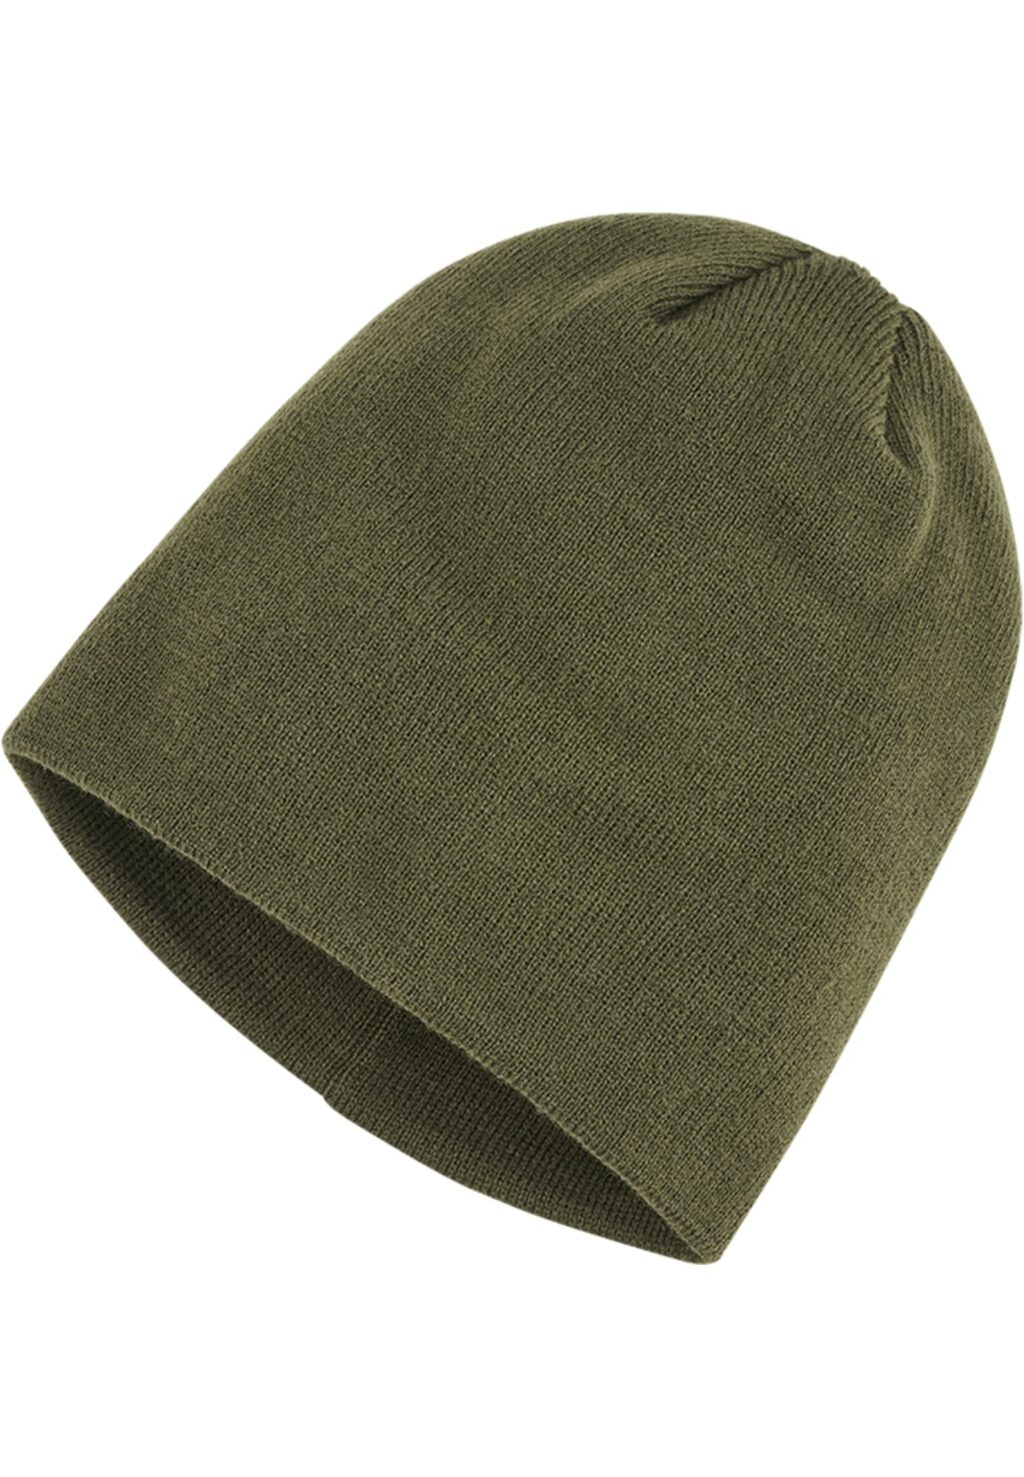 Brandit Beanie Mover olive one BD7019